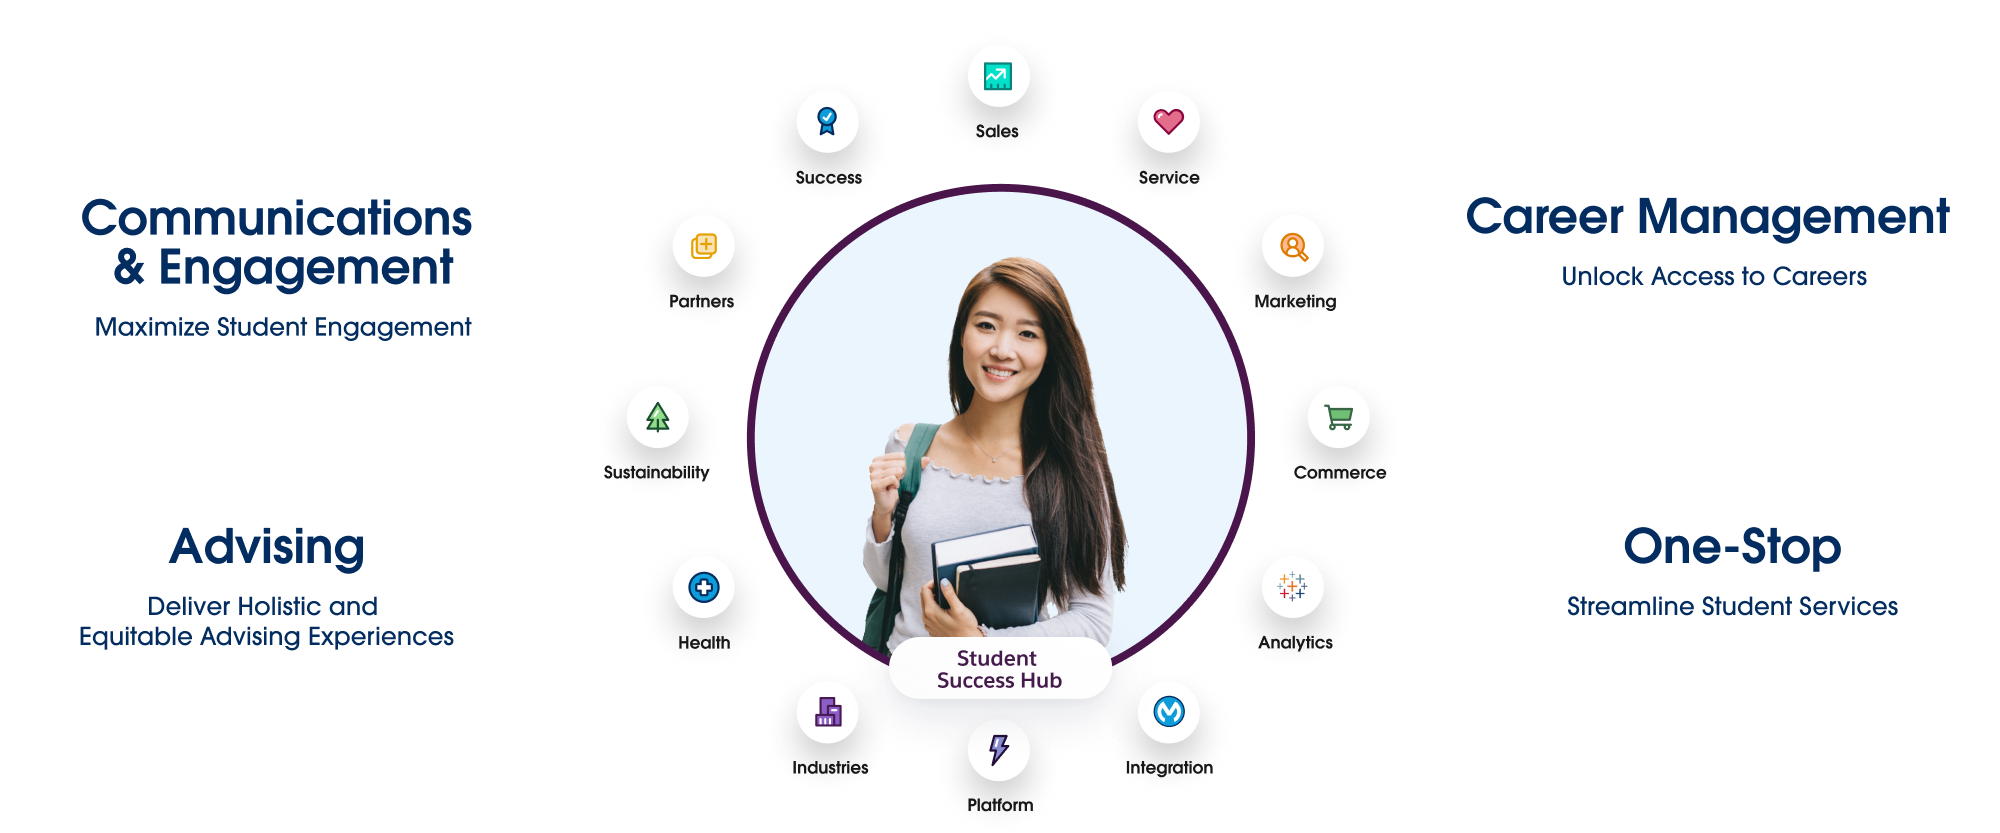 Student Success Hub for Higher Ed graphic, with functionality for communications & engagement, advising, career management, and one-stop student services